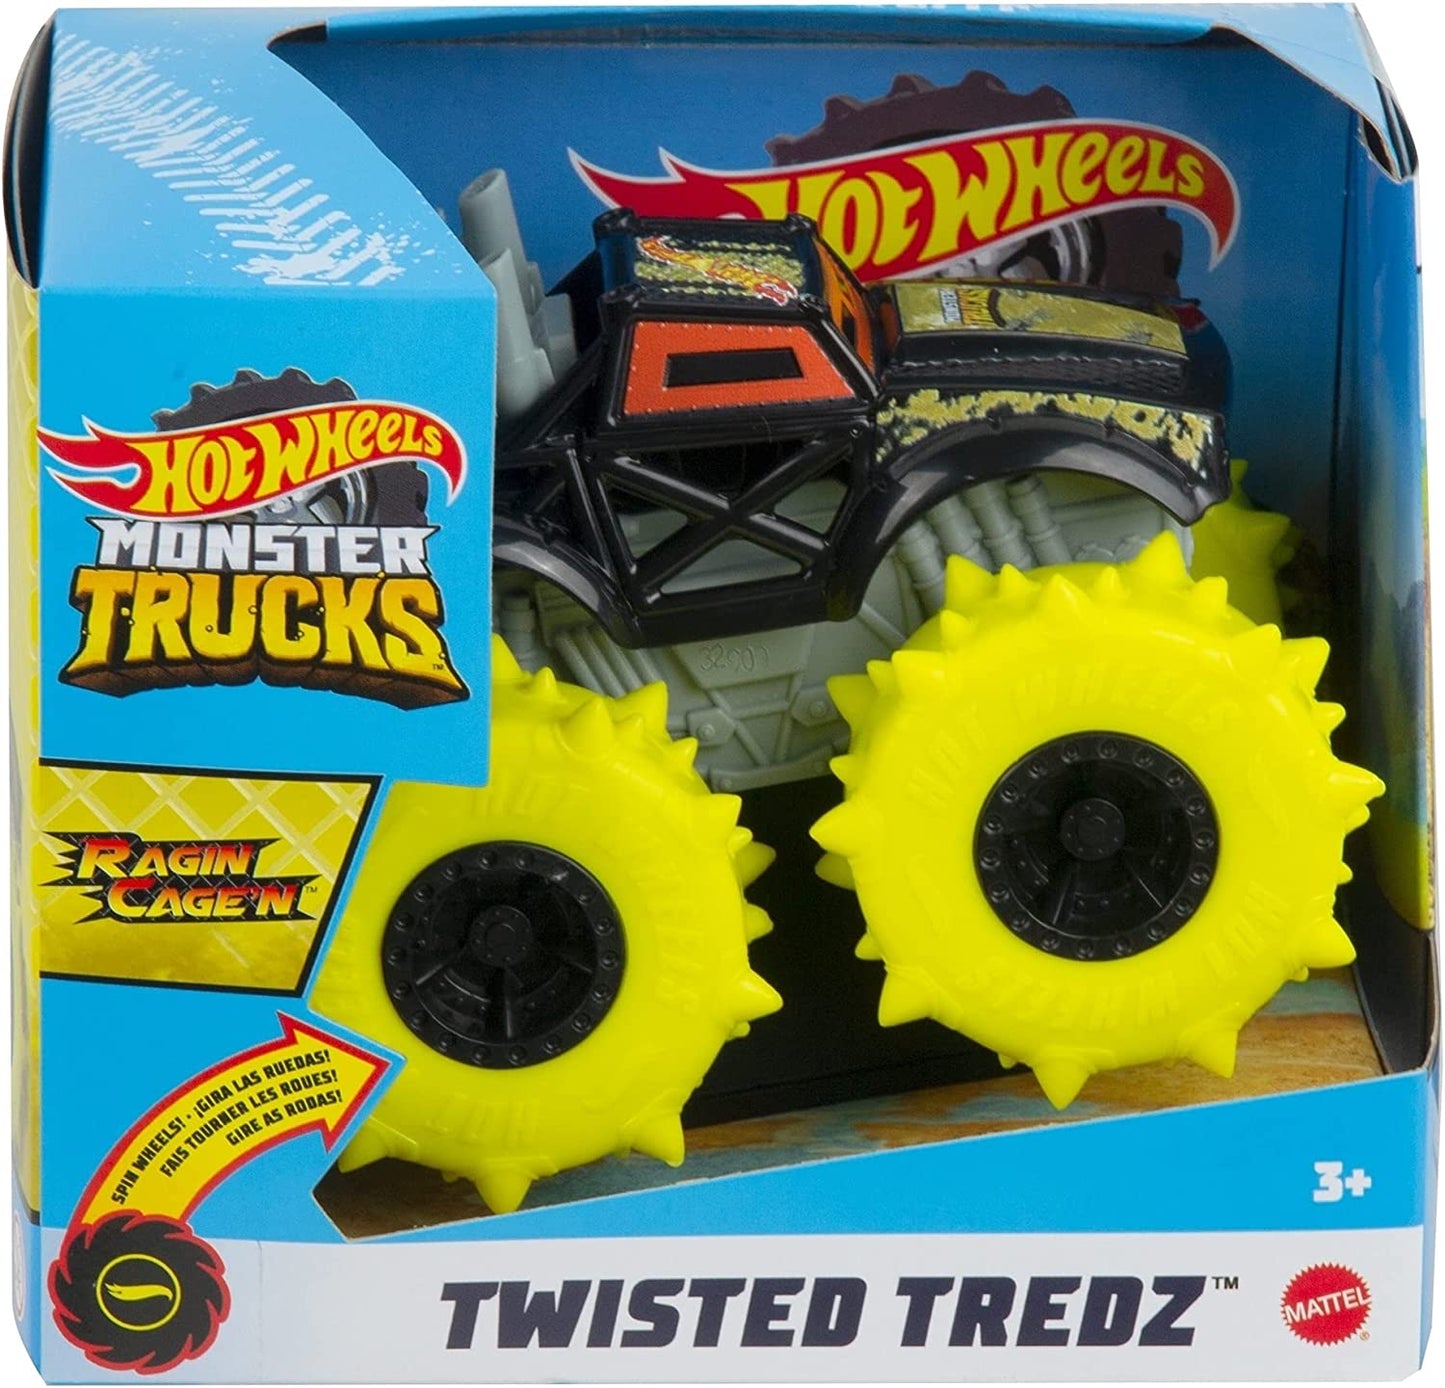 Hot Wheels Monster Trucks 1:43 Scale Rev Tredz Vehicles with Friction Motor for Kids Ages 3 Years Old & Up